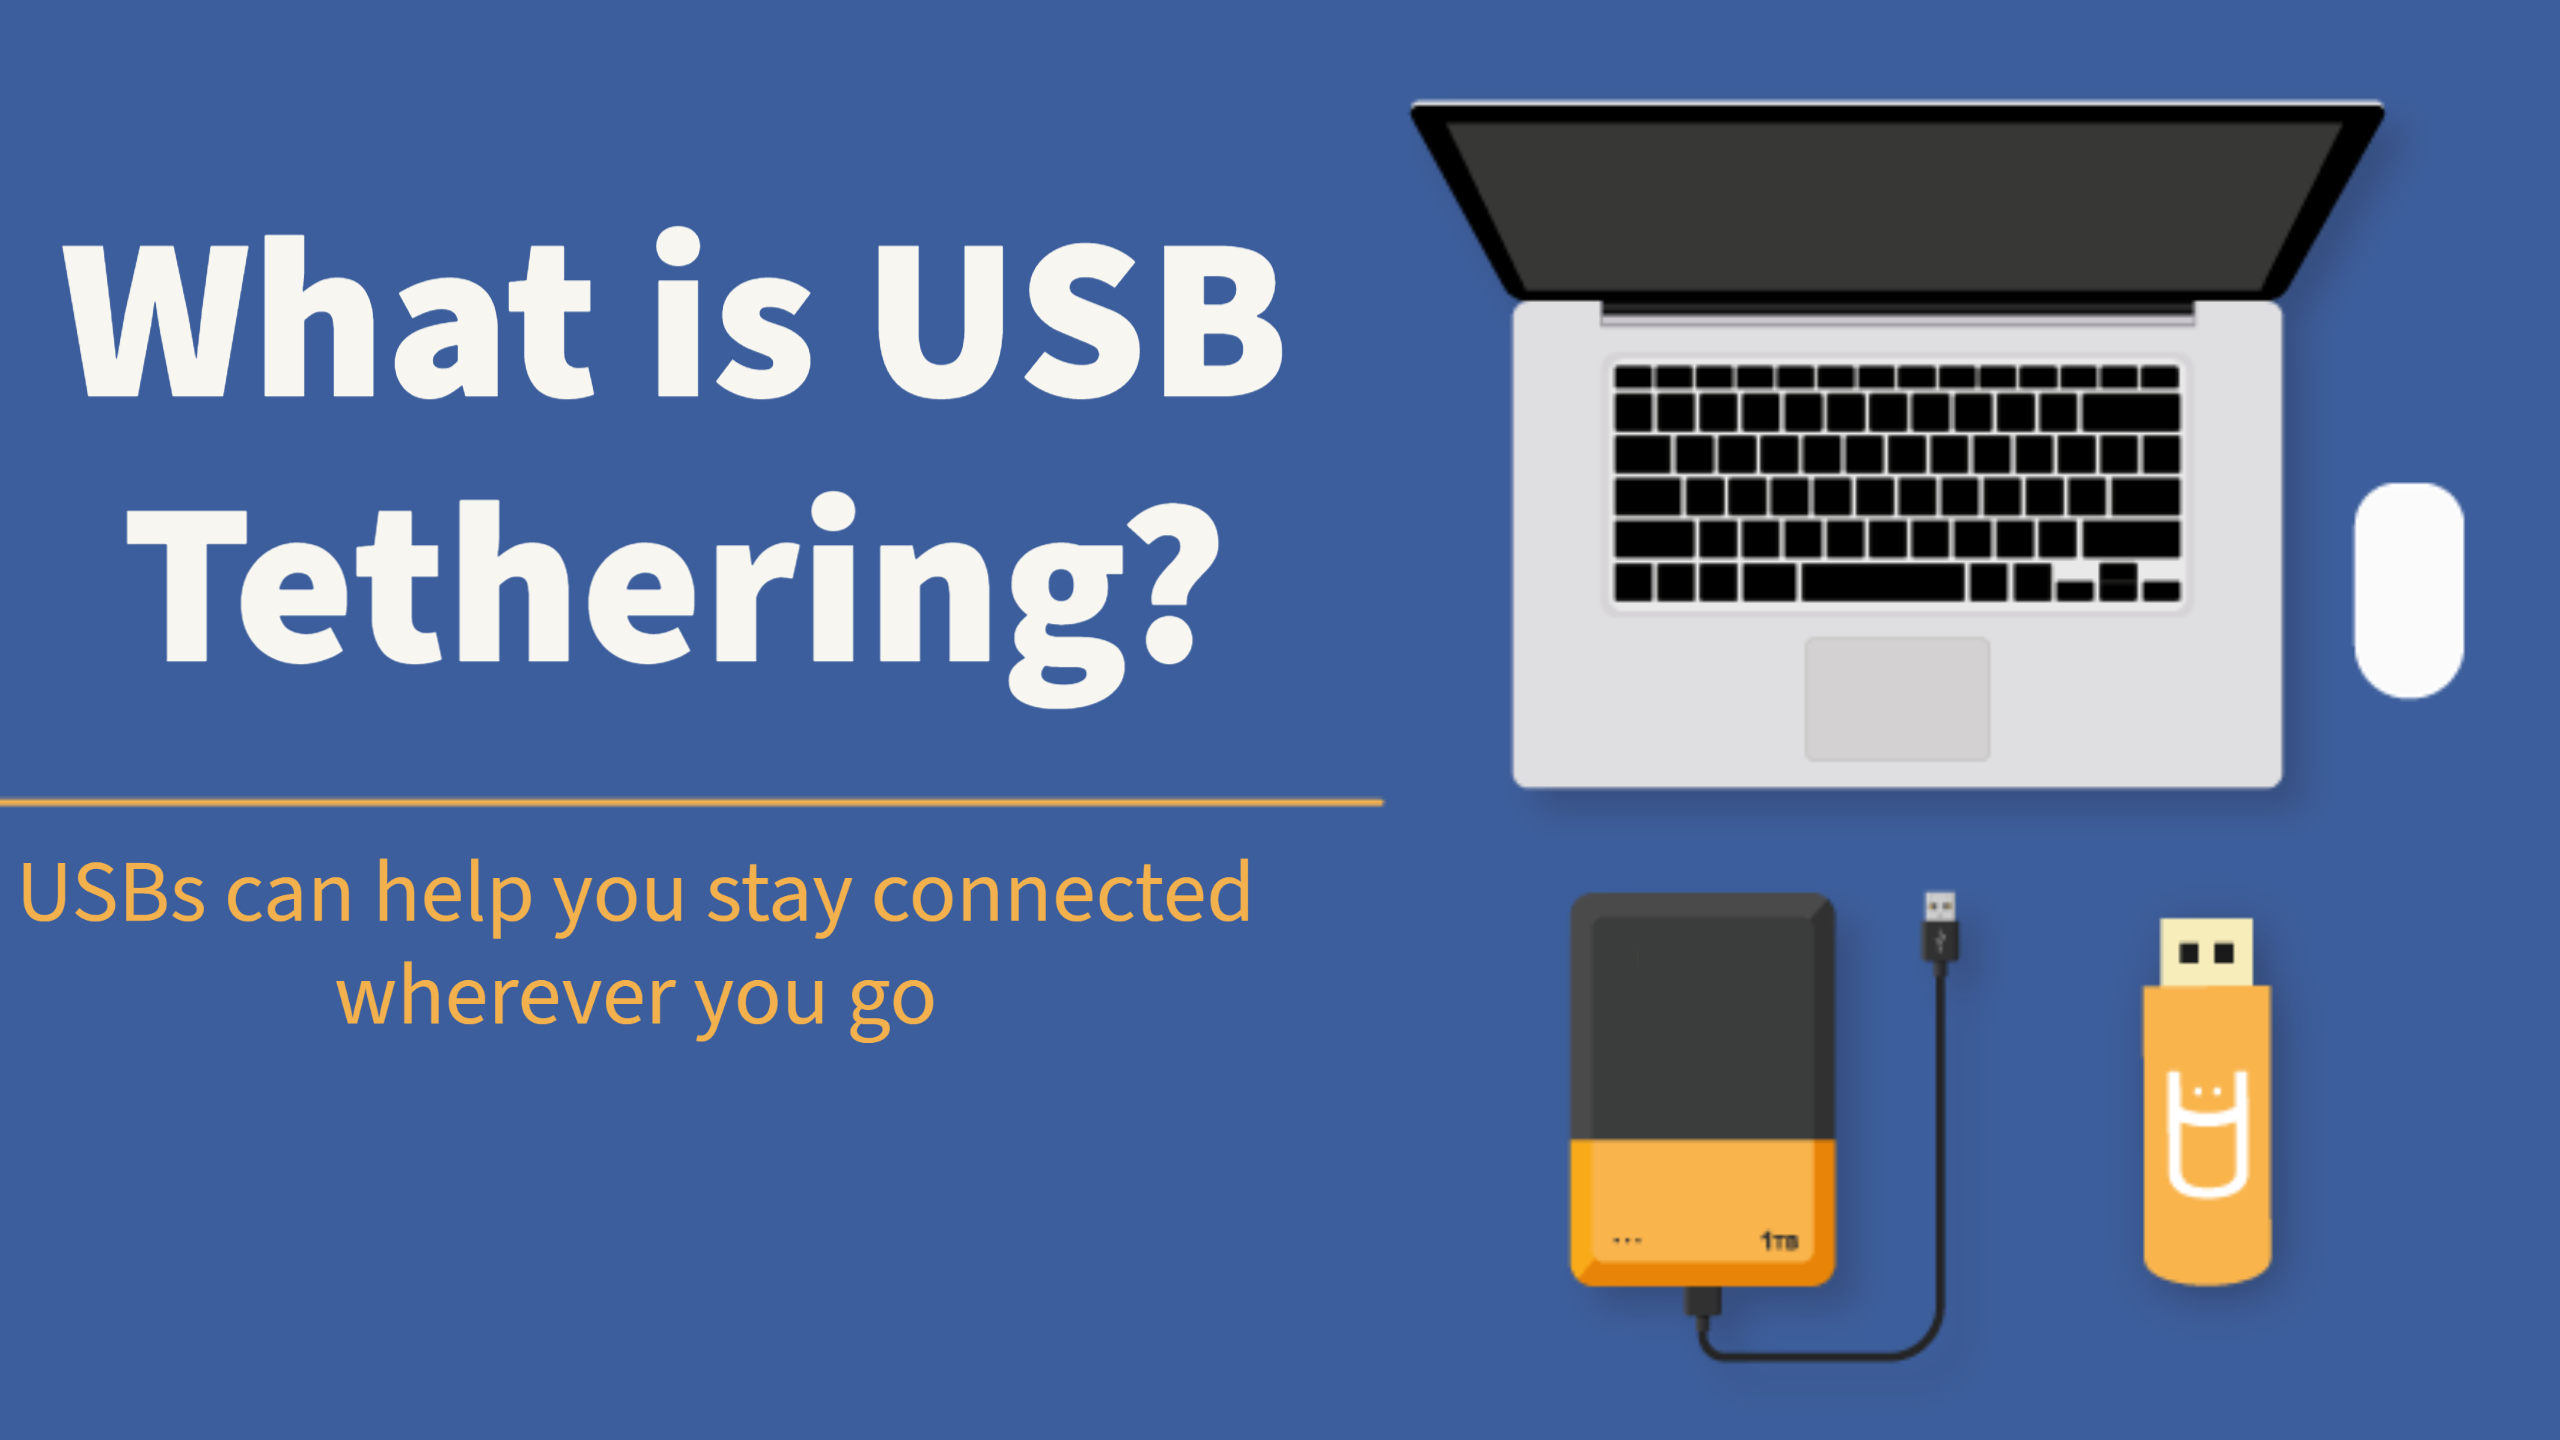 What is USB Tethering?